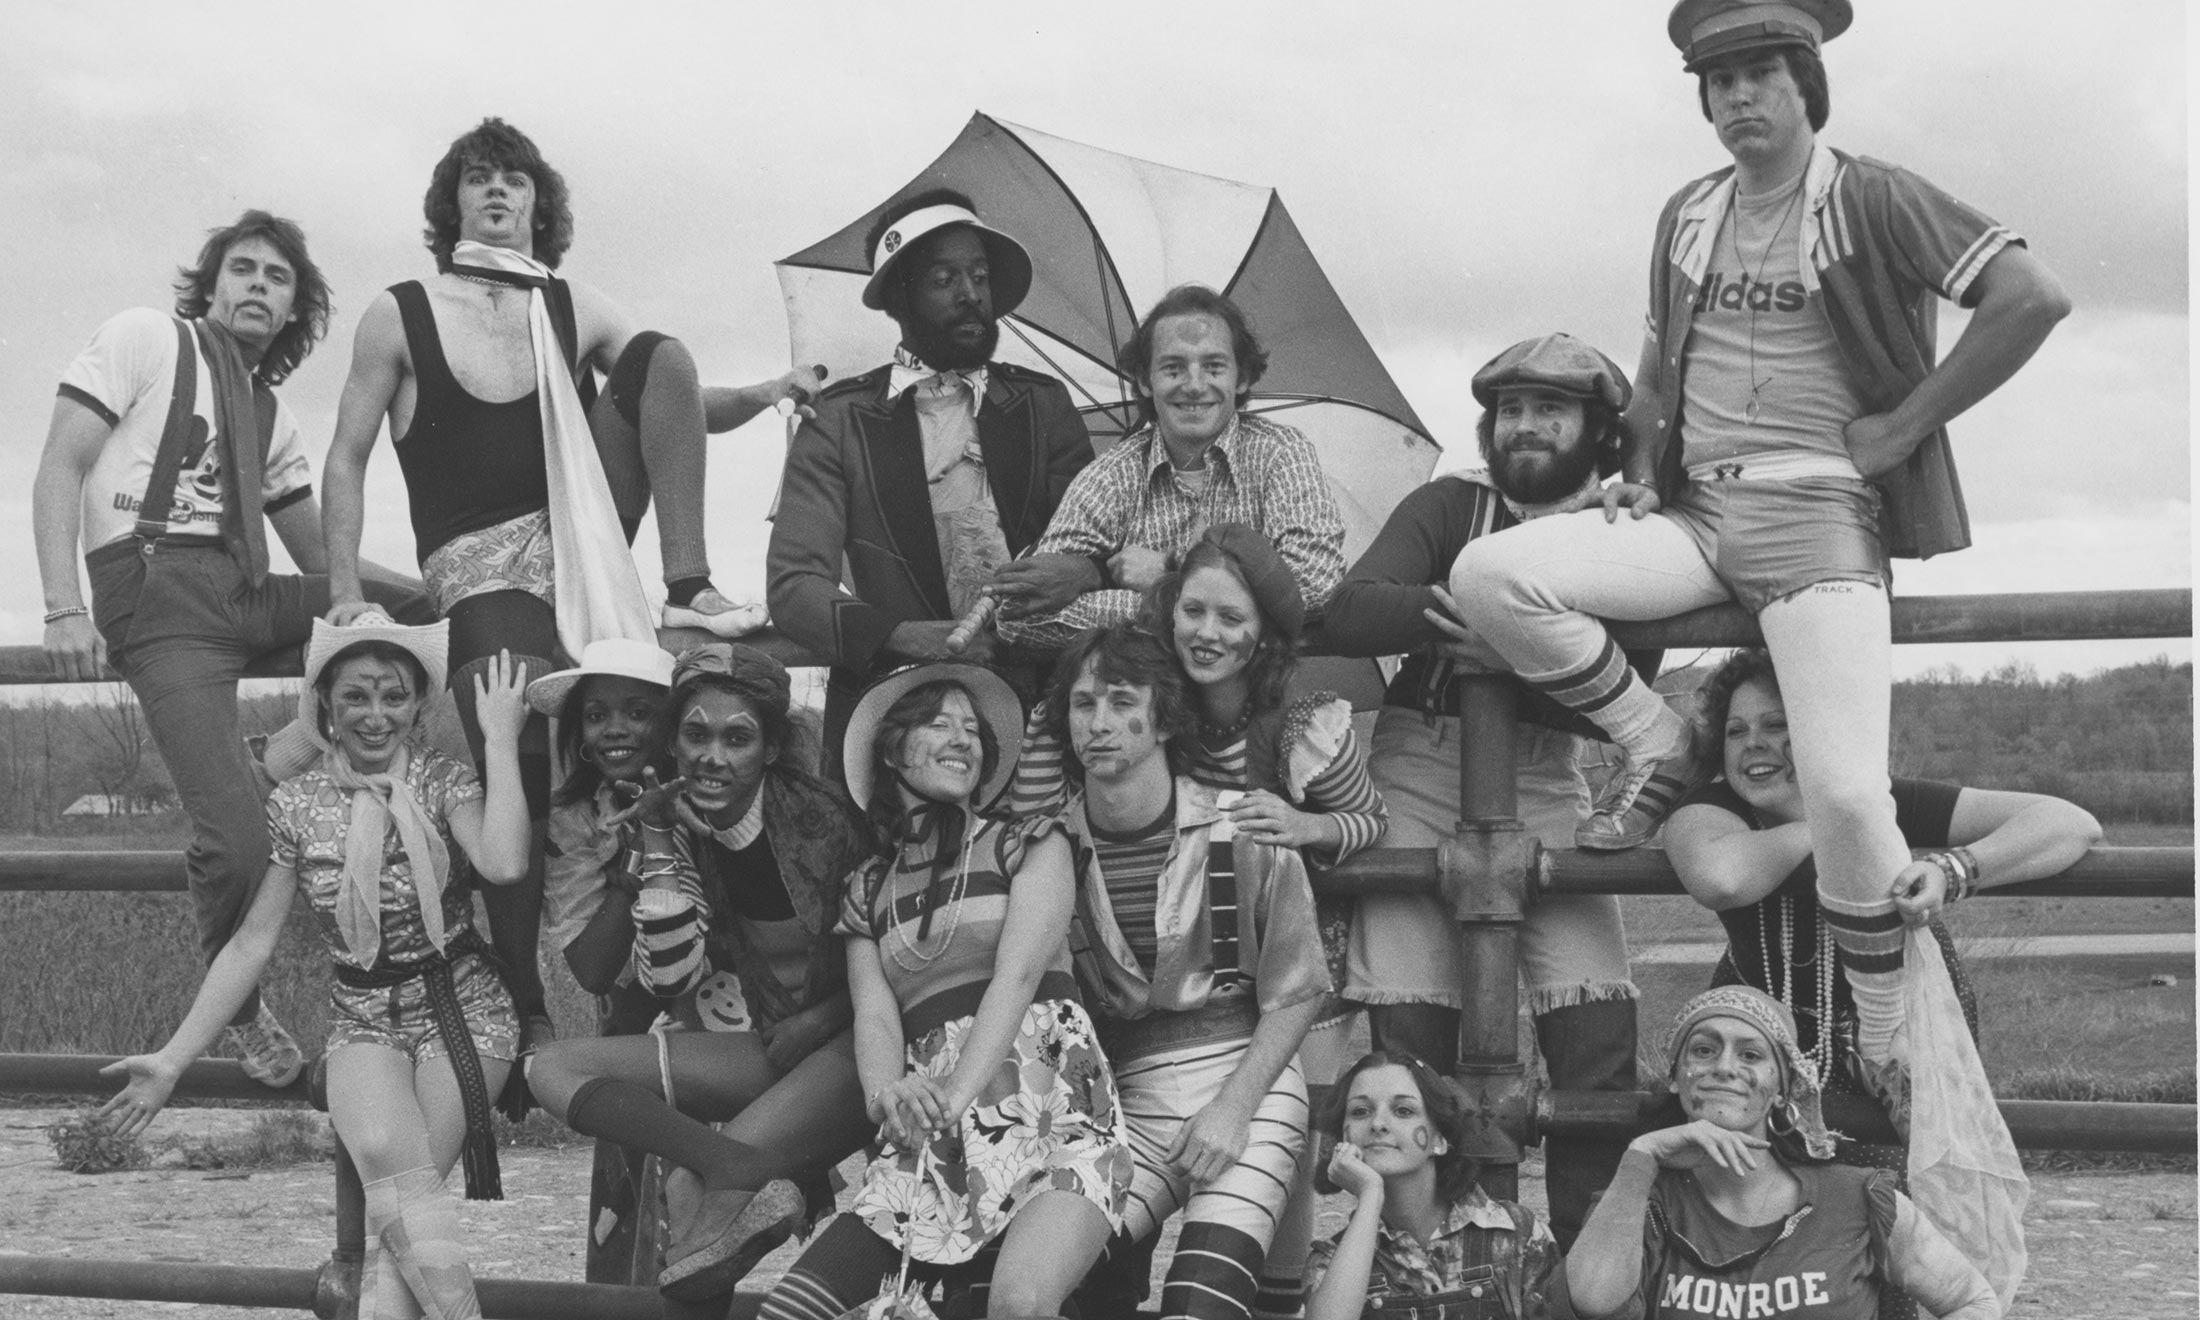 Oakland University drama students dressed in costumes sit on a gate for a photo outside in 1975